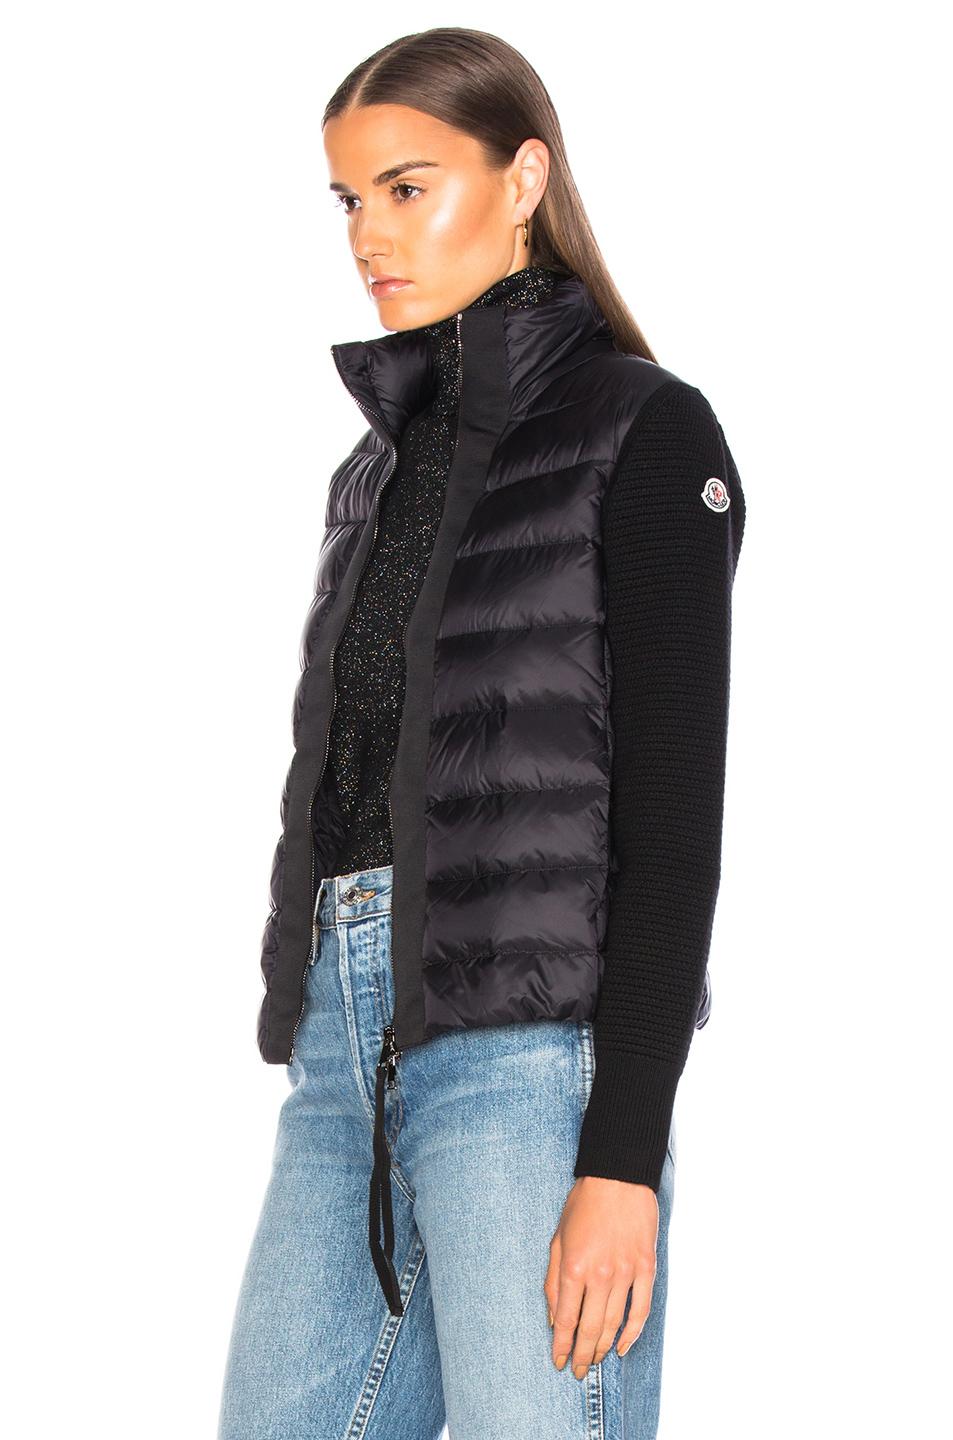 Moncler Wool Maglione Tricot Cardigan in Black | Lyst